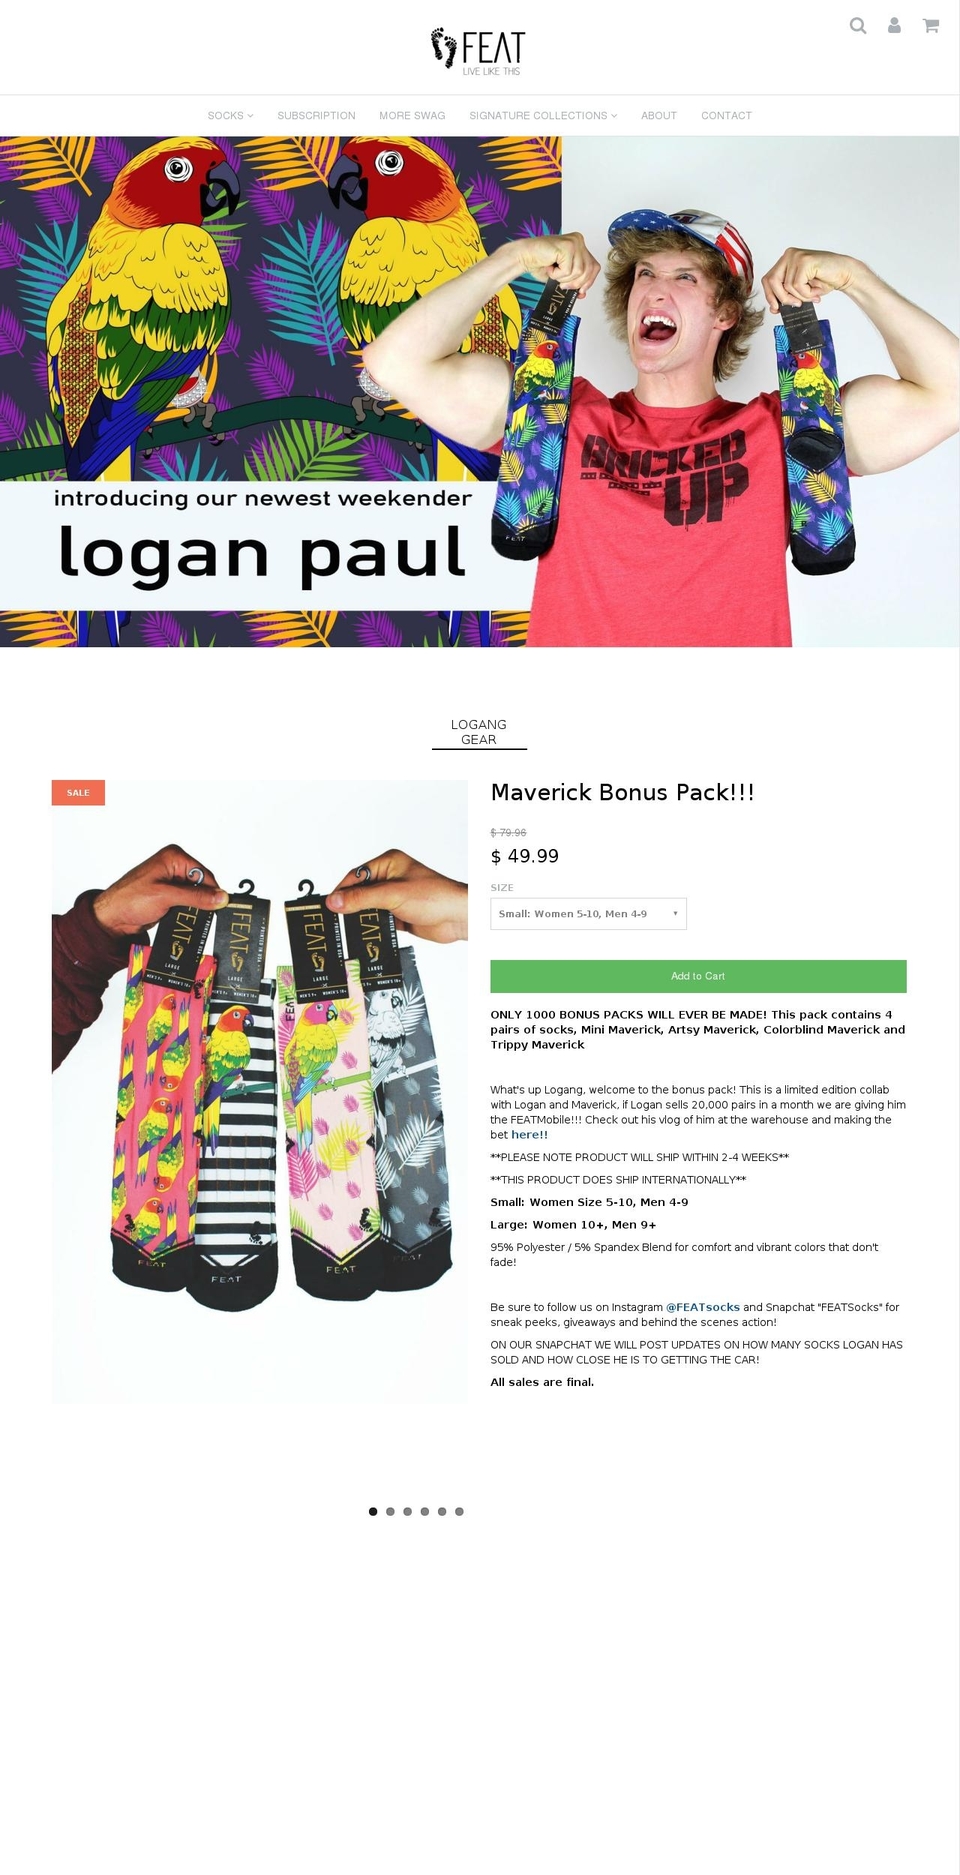 Focal Shopify theme site example featsocks.com